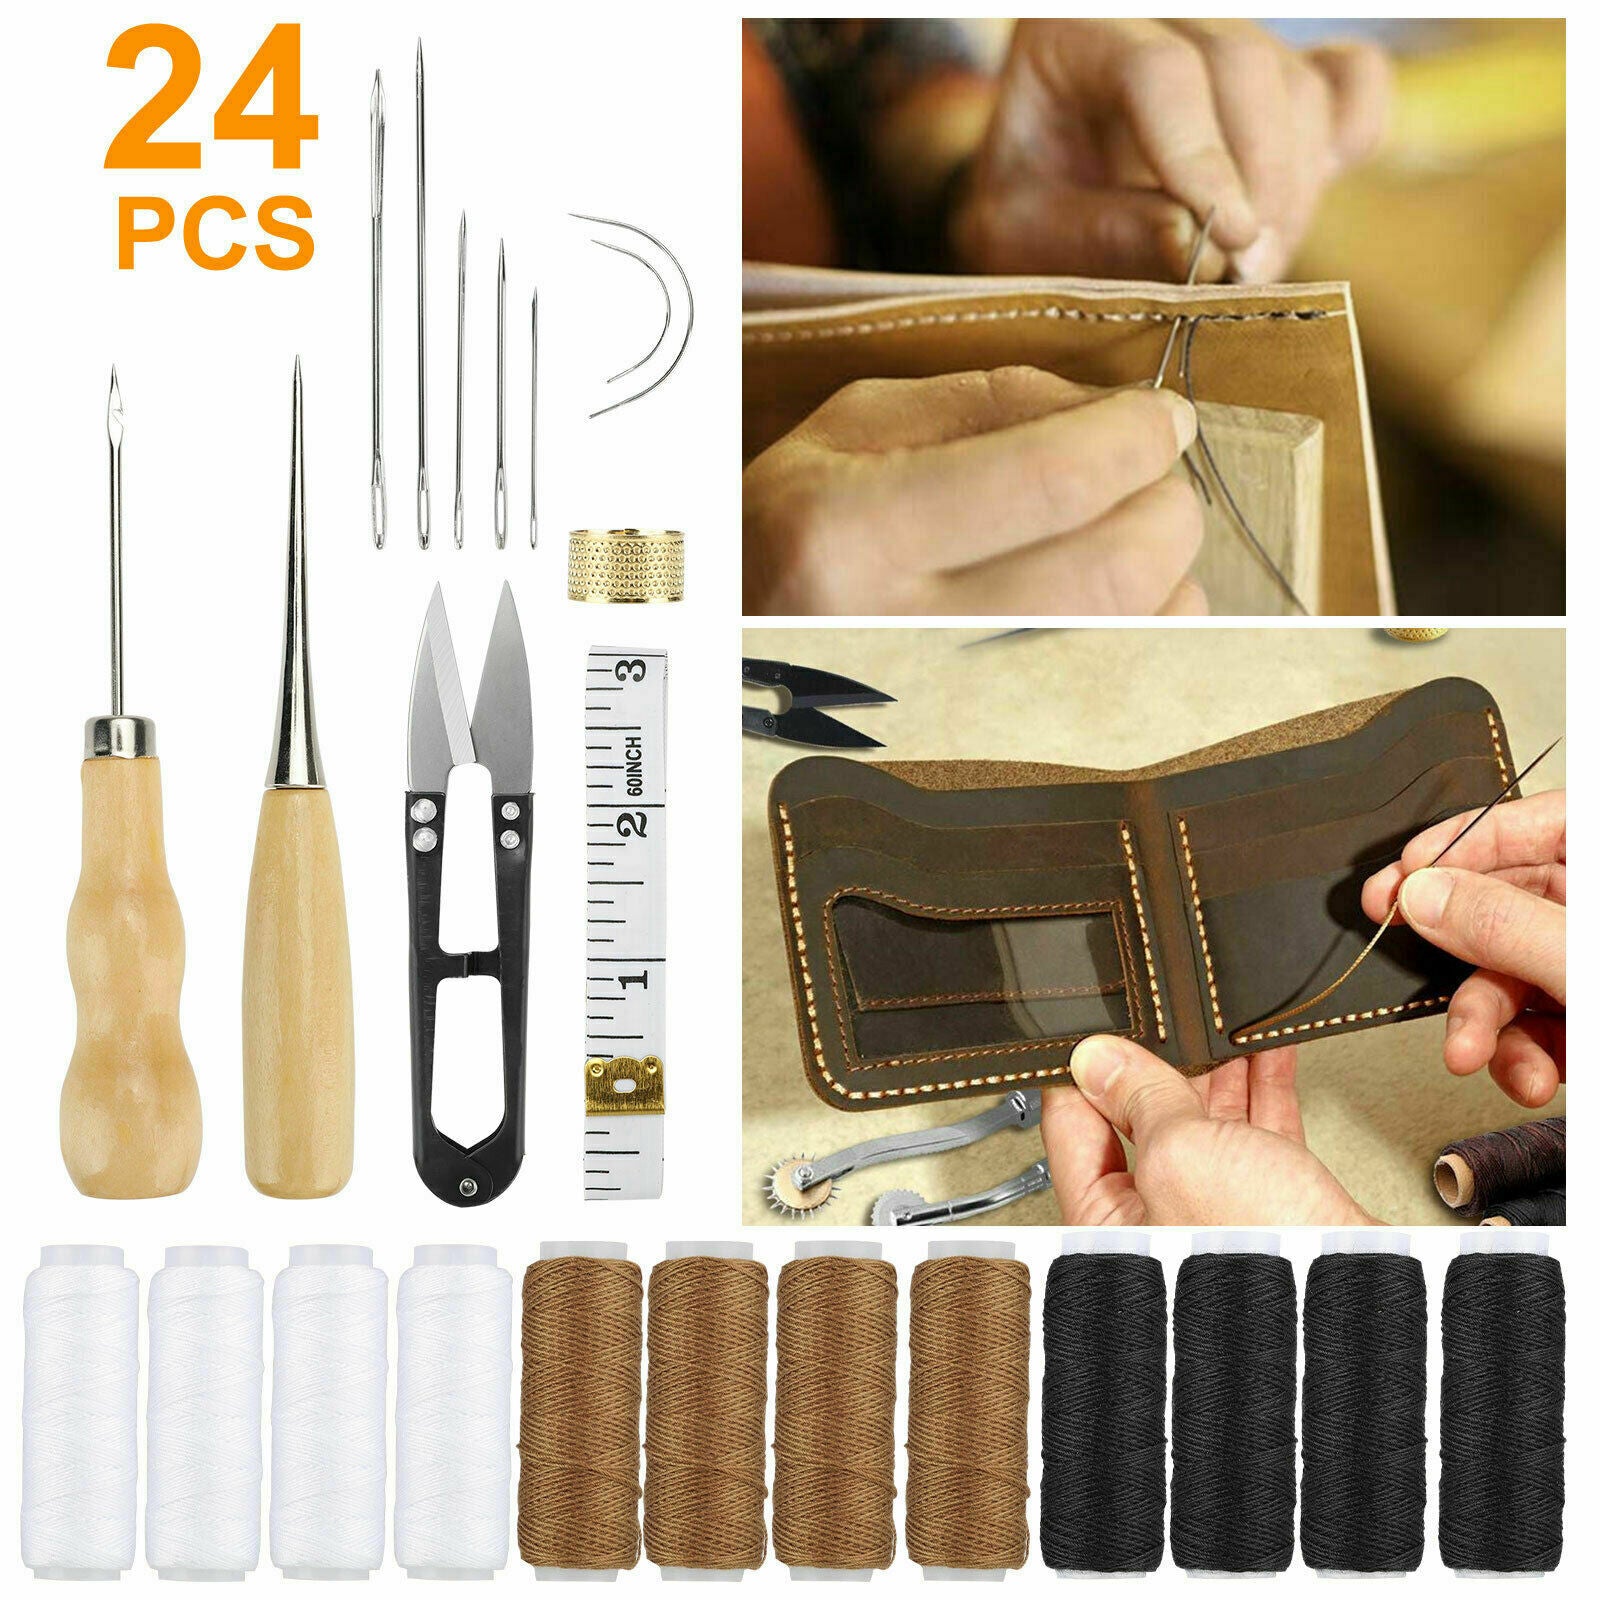 24 Leather Craft Punch Tools Kit Stitching Carving Working Sewing Saddle Groover